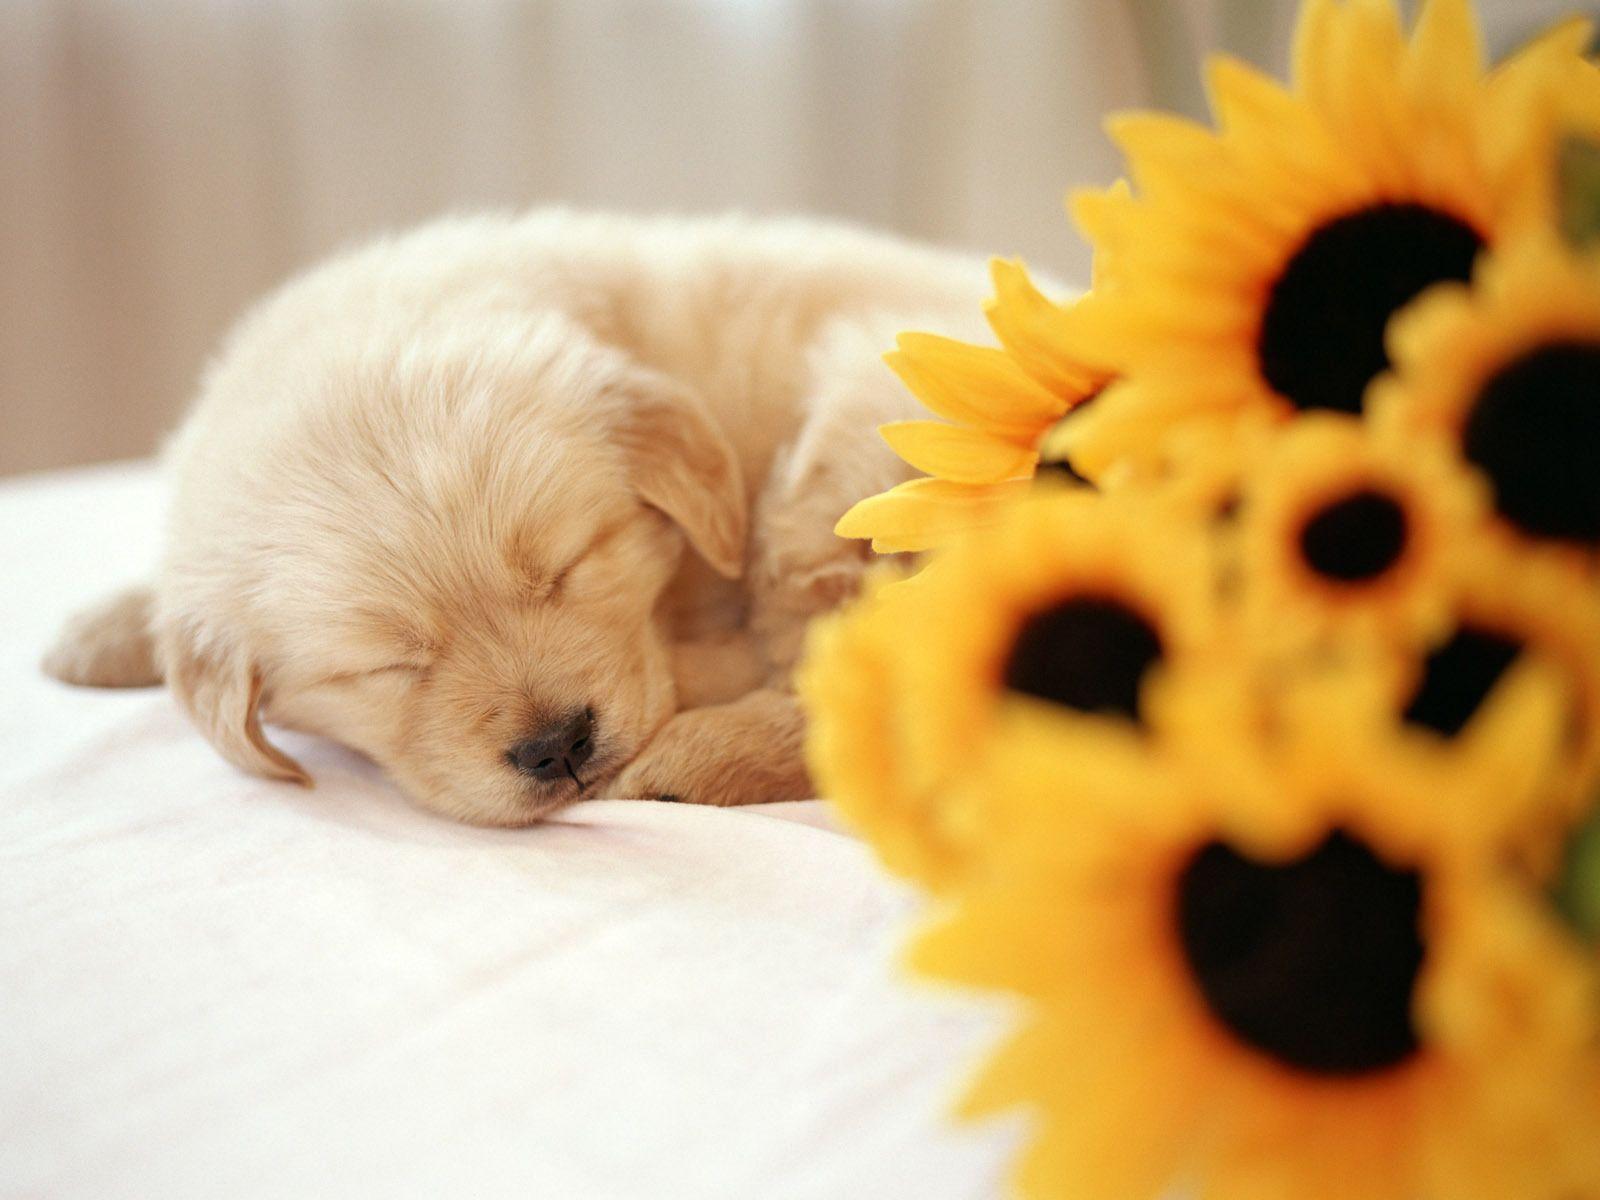 about Cute Puppy Wallpaper. Cute puppies